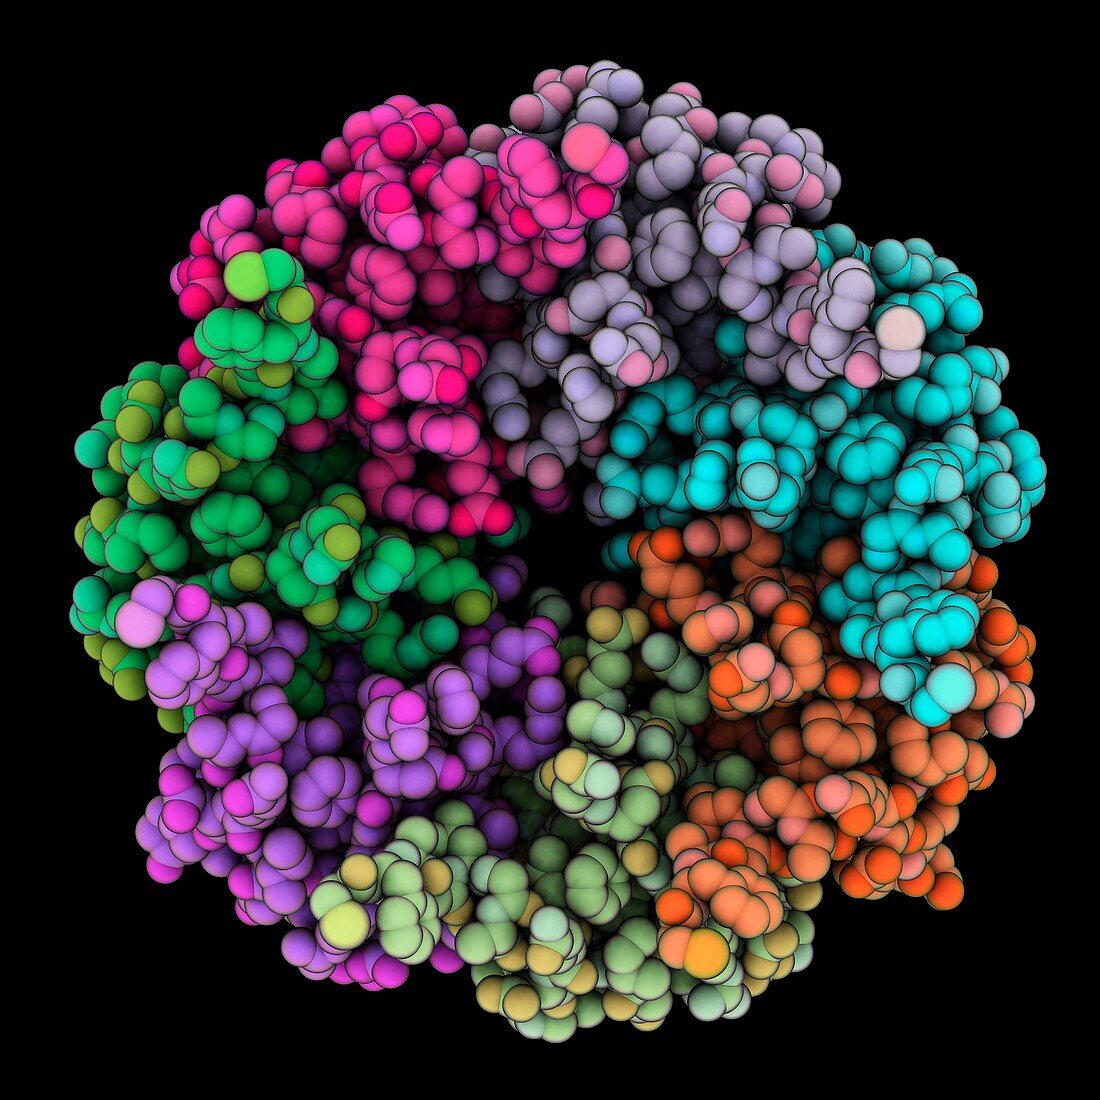 Sm-like archaeal protein